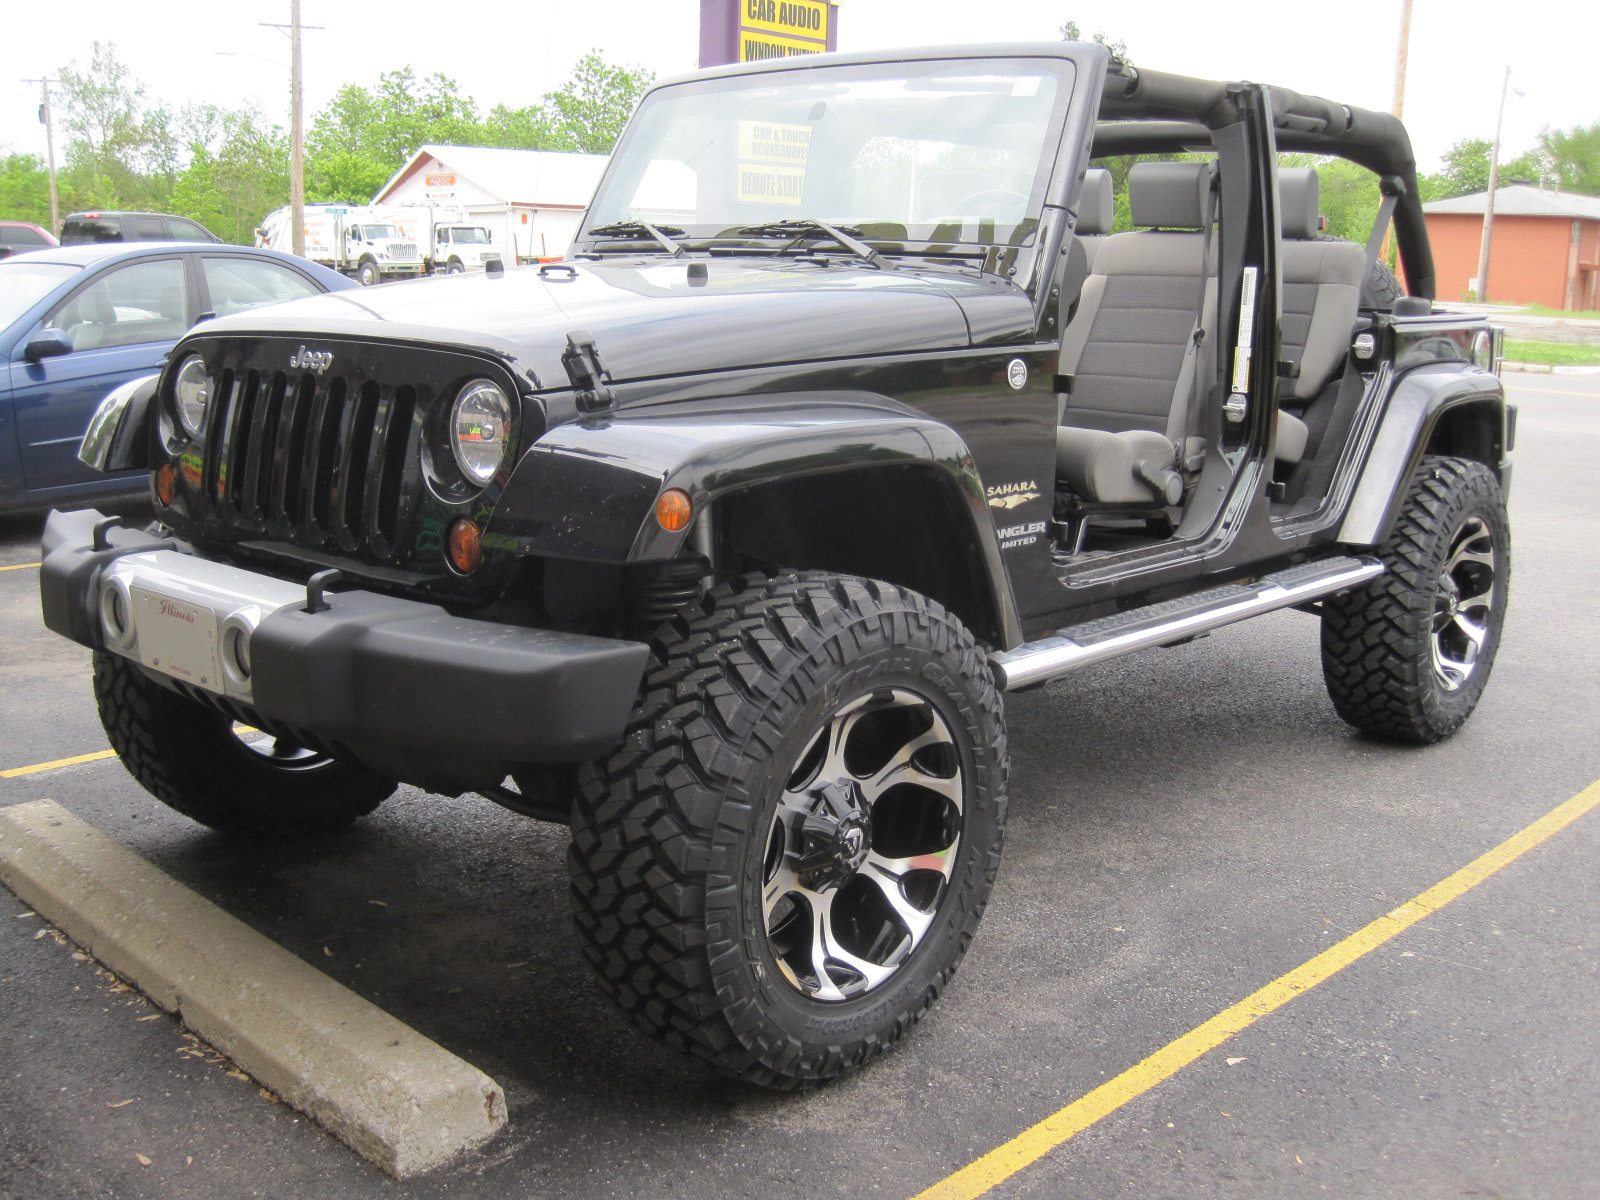 Jeep Lift Kit at Audio Visionz by Midwest Truck Accessories